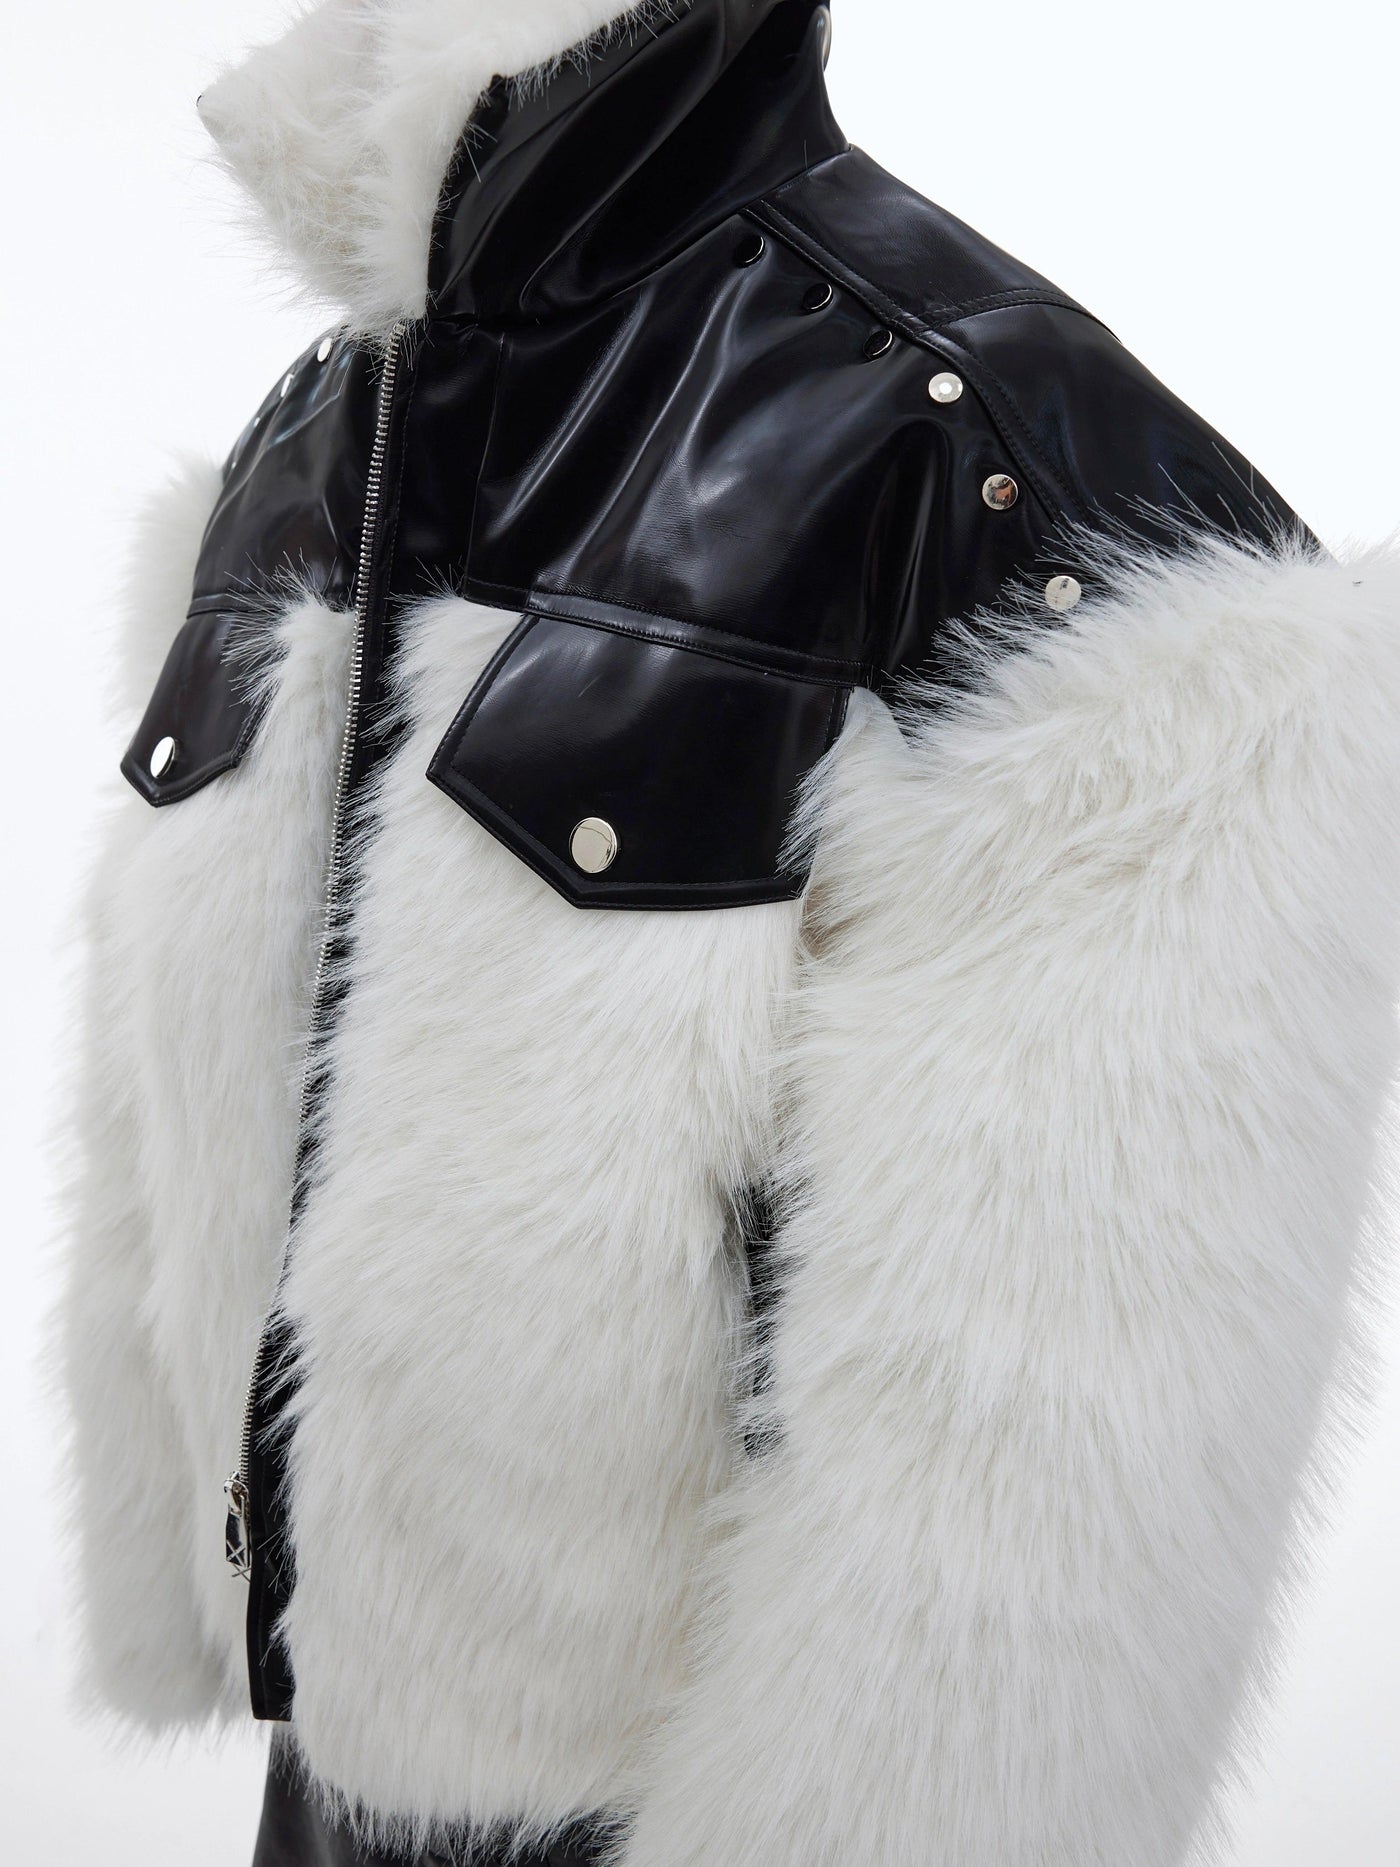 Fur and Leather Splice Jacket Korean Street Fashion Jacket By Argue Culture Shop Online at OH Vault